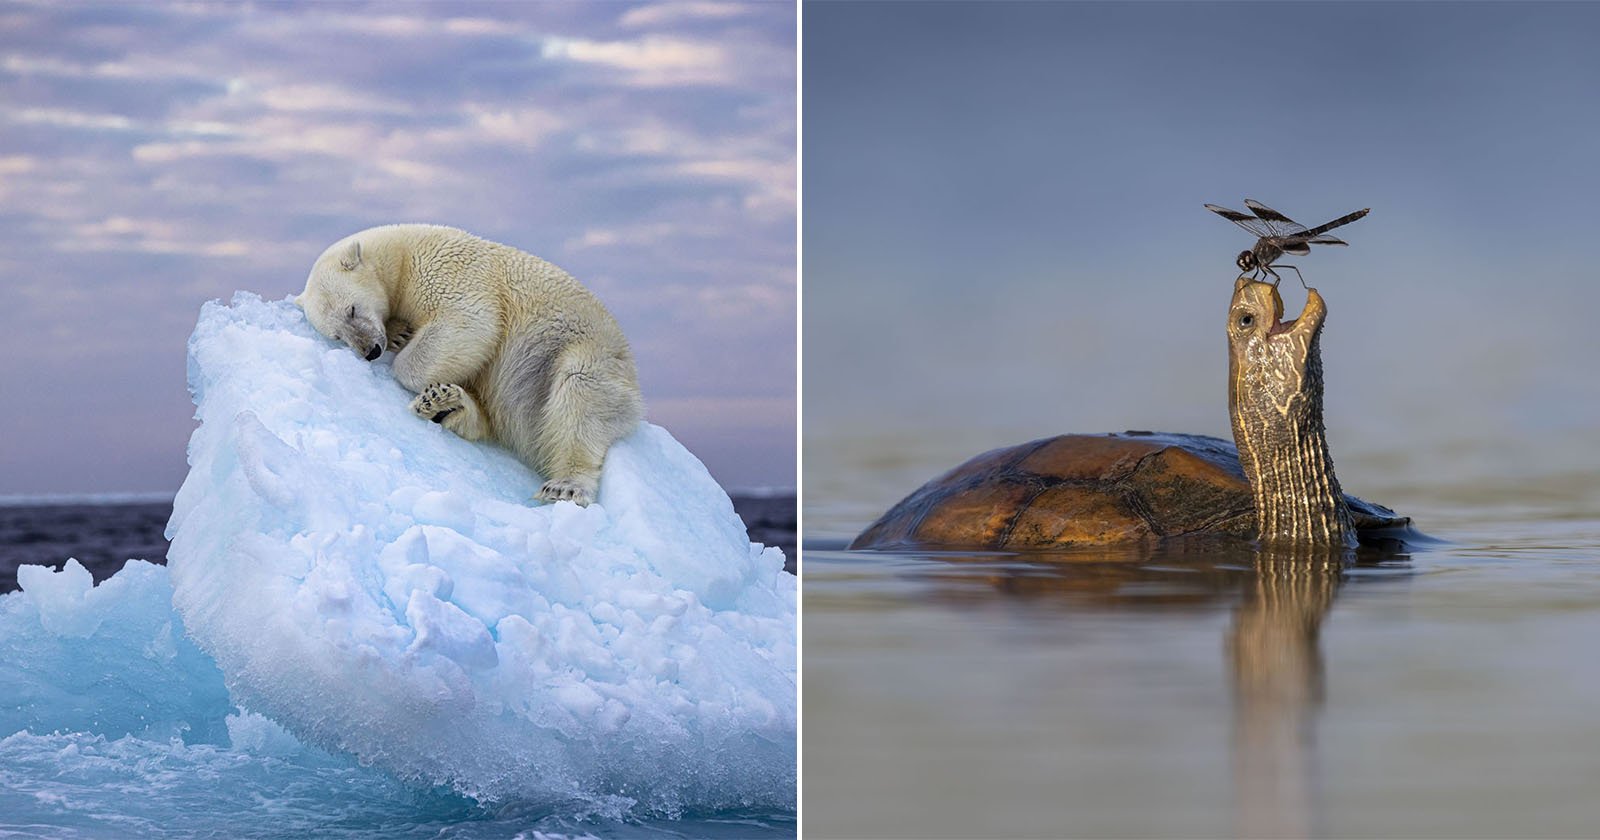 Vote for Your Favorite in the Wildlife Photographer of the Year Contest